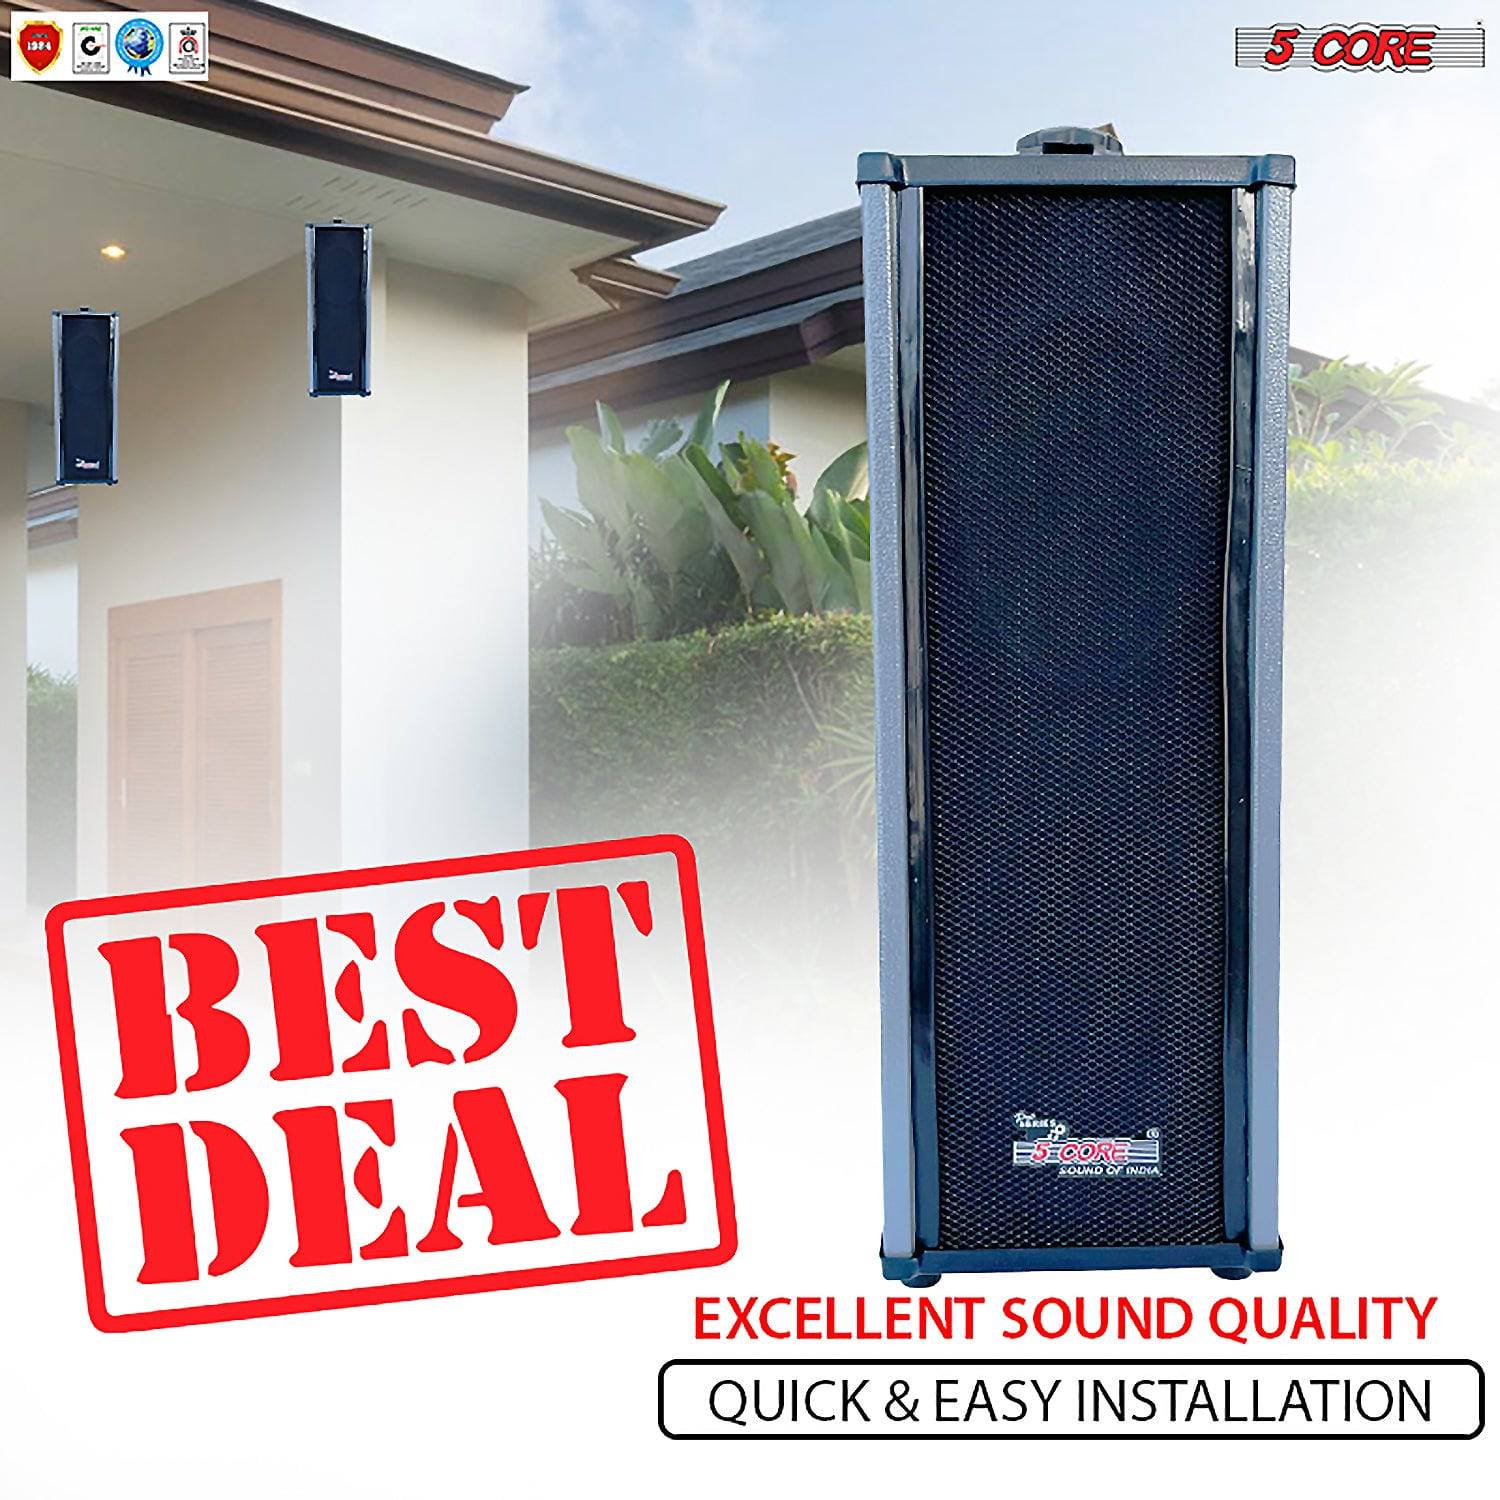 5Core Speaker Commercial Paging PA On Wall Mount Indoor Outdoor Home